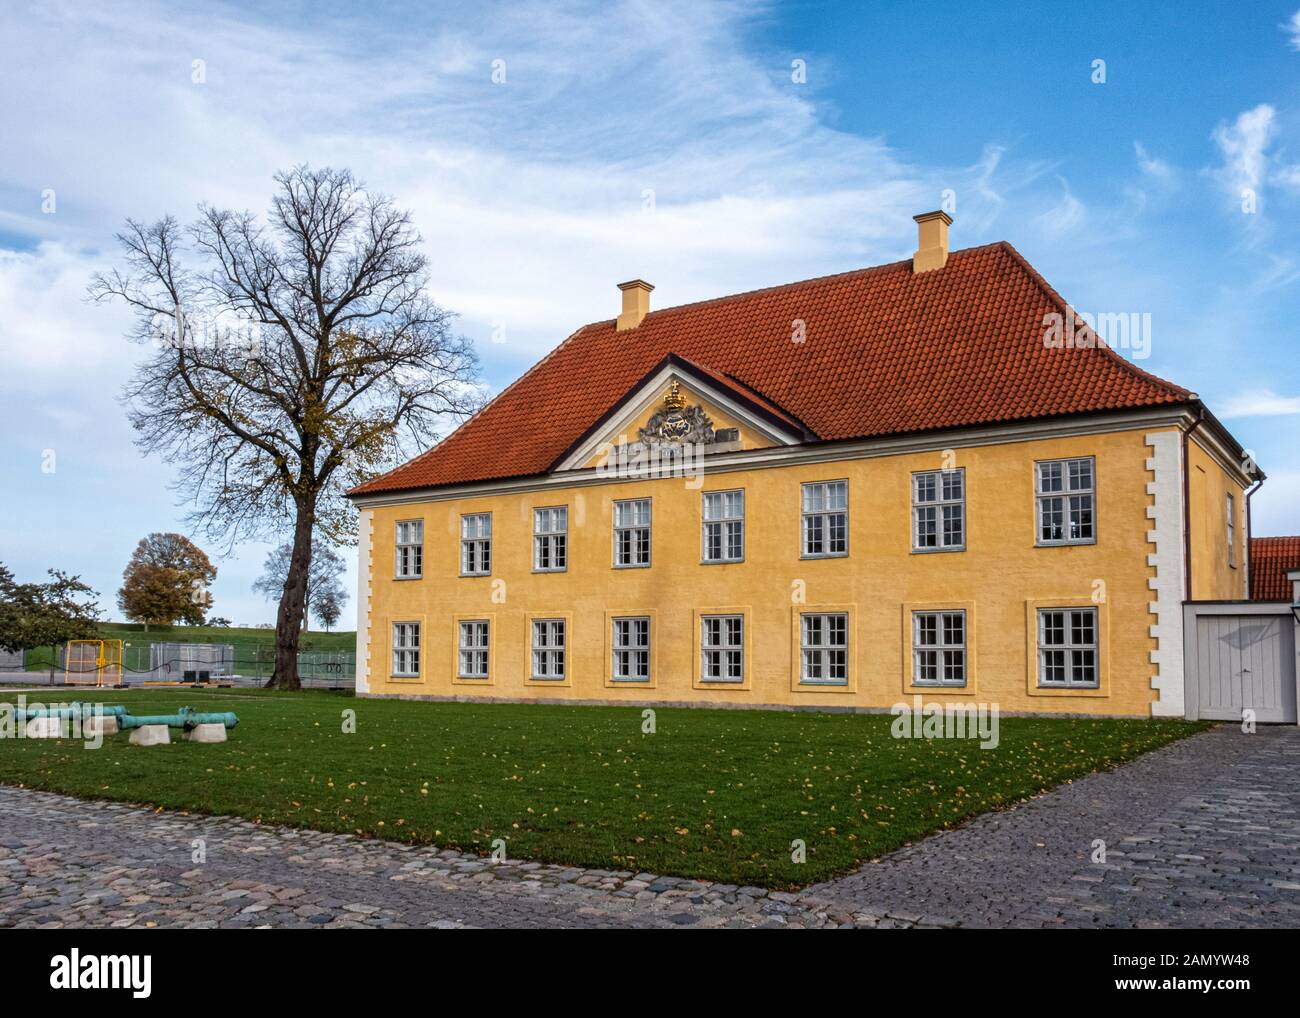 The Commander's House. Baroque-style two-storey yellow & white building with red tile roof by architect Elias Häuser  - Kastellet, Copenhagen, Denmark Stock Photo